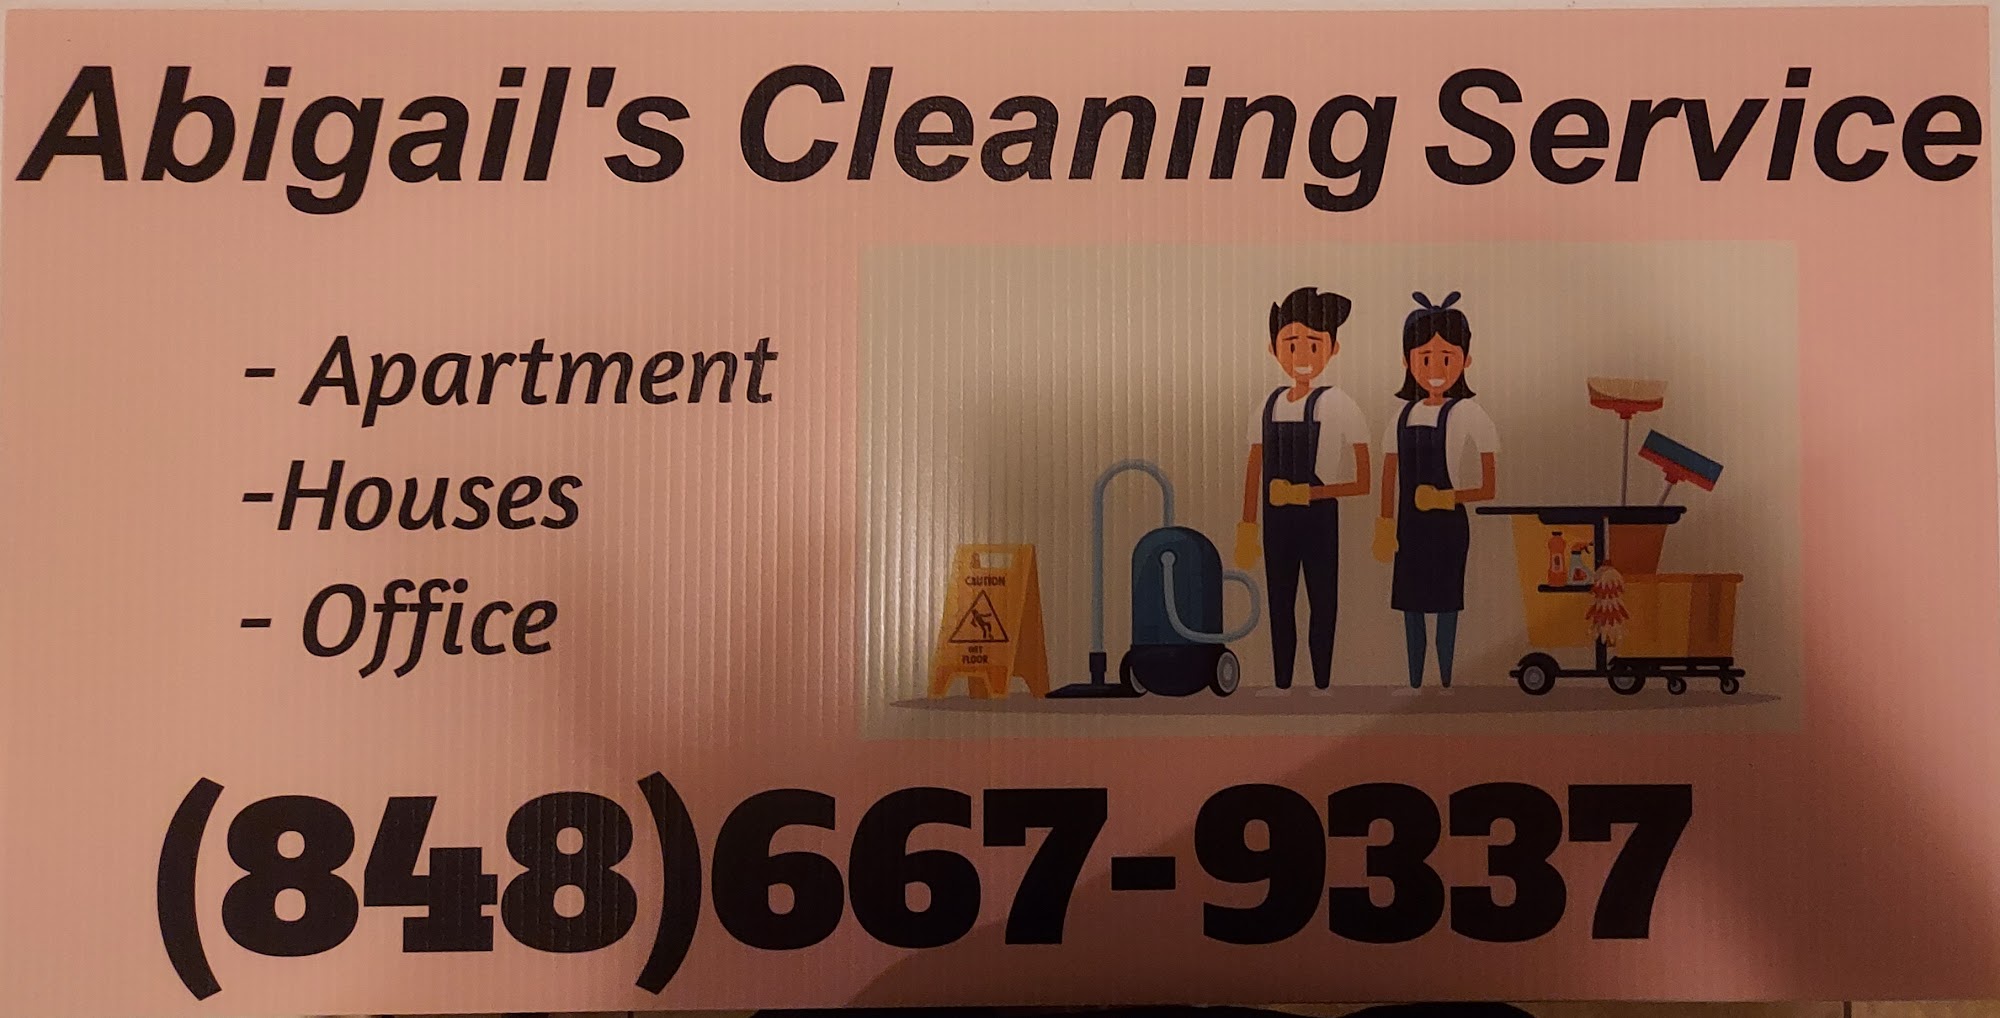 Abigail's Cleaning Services